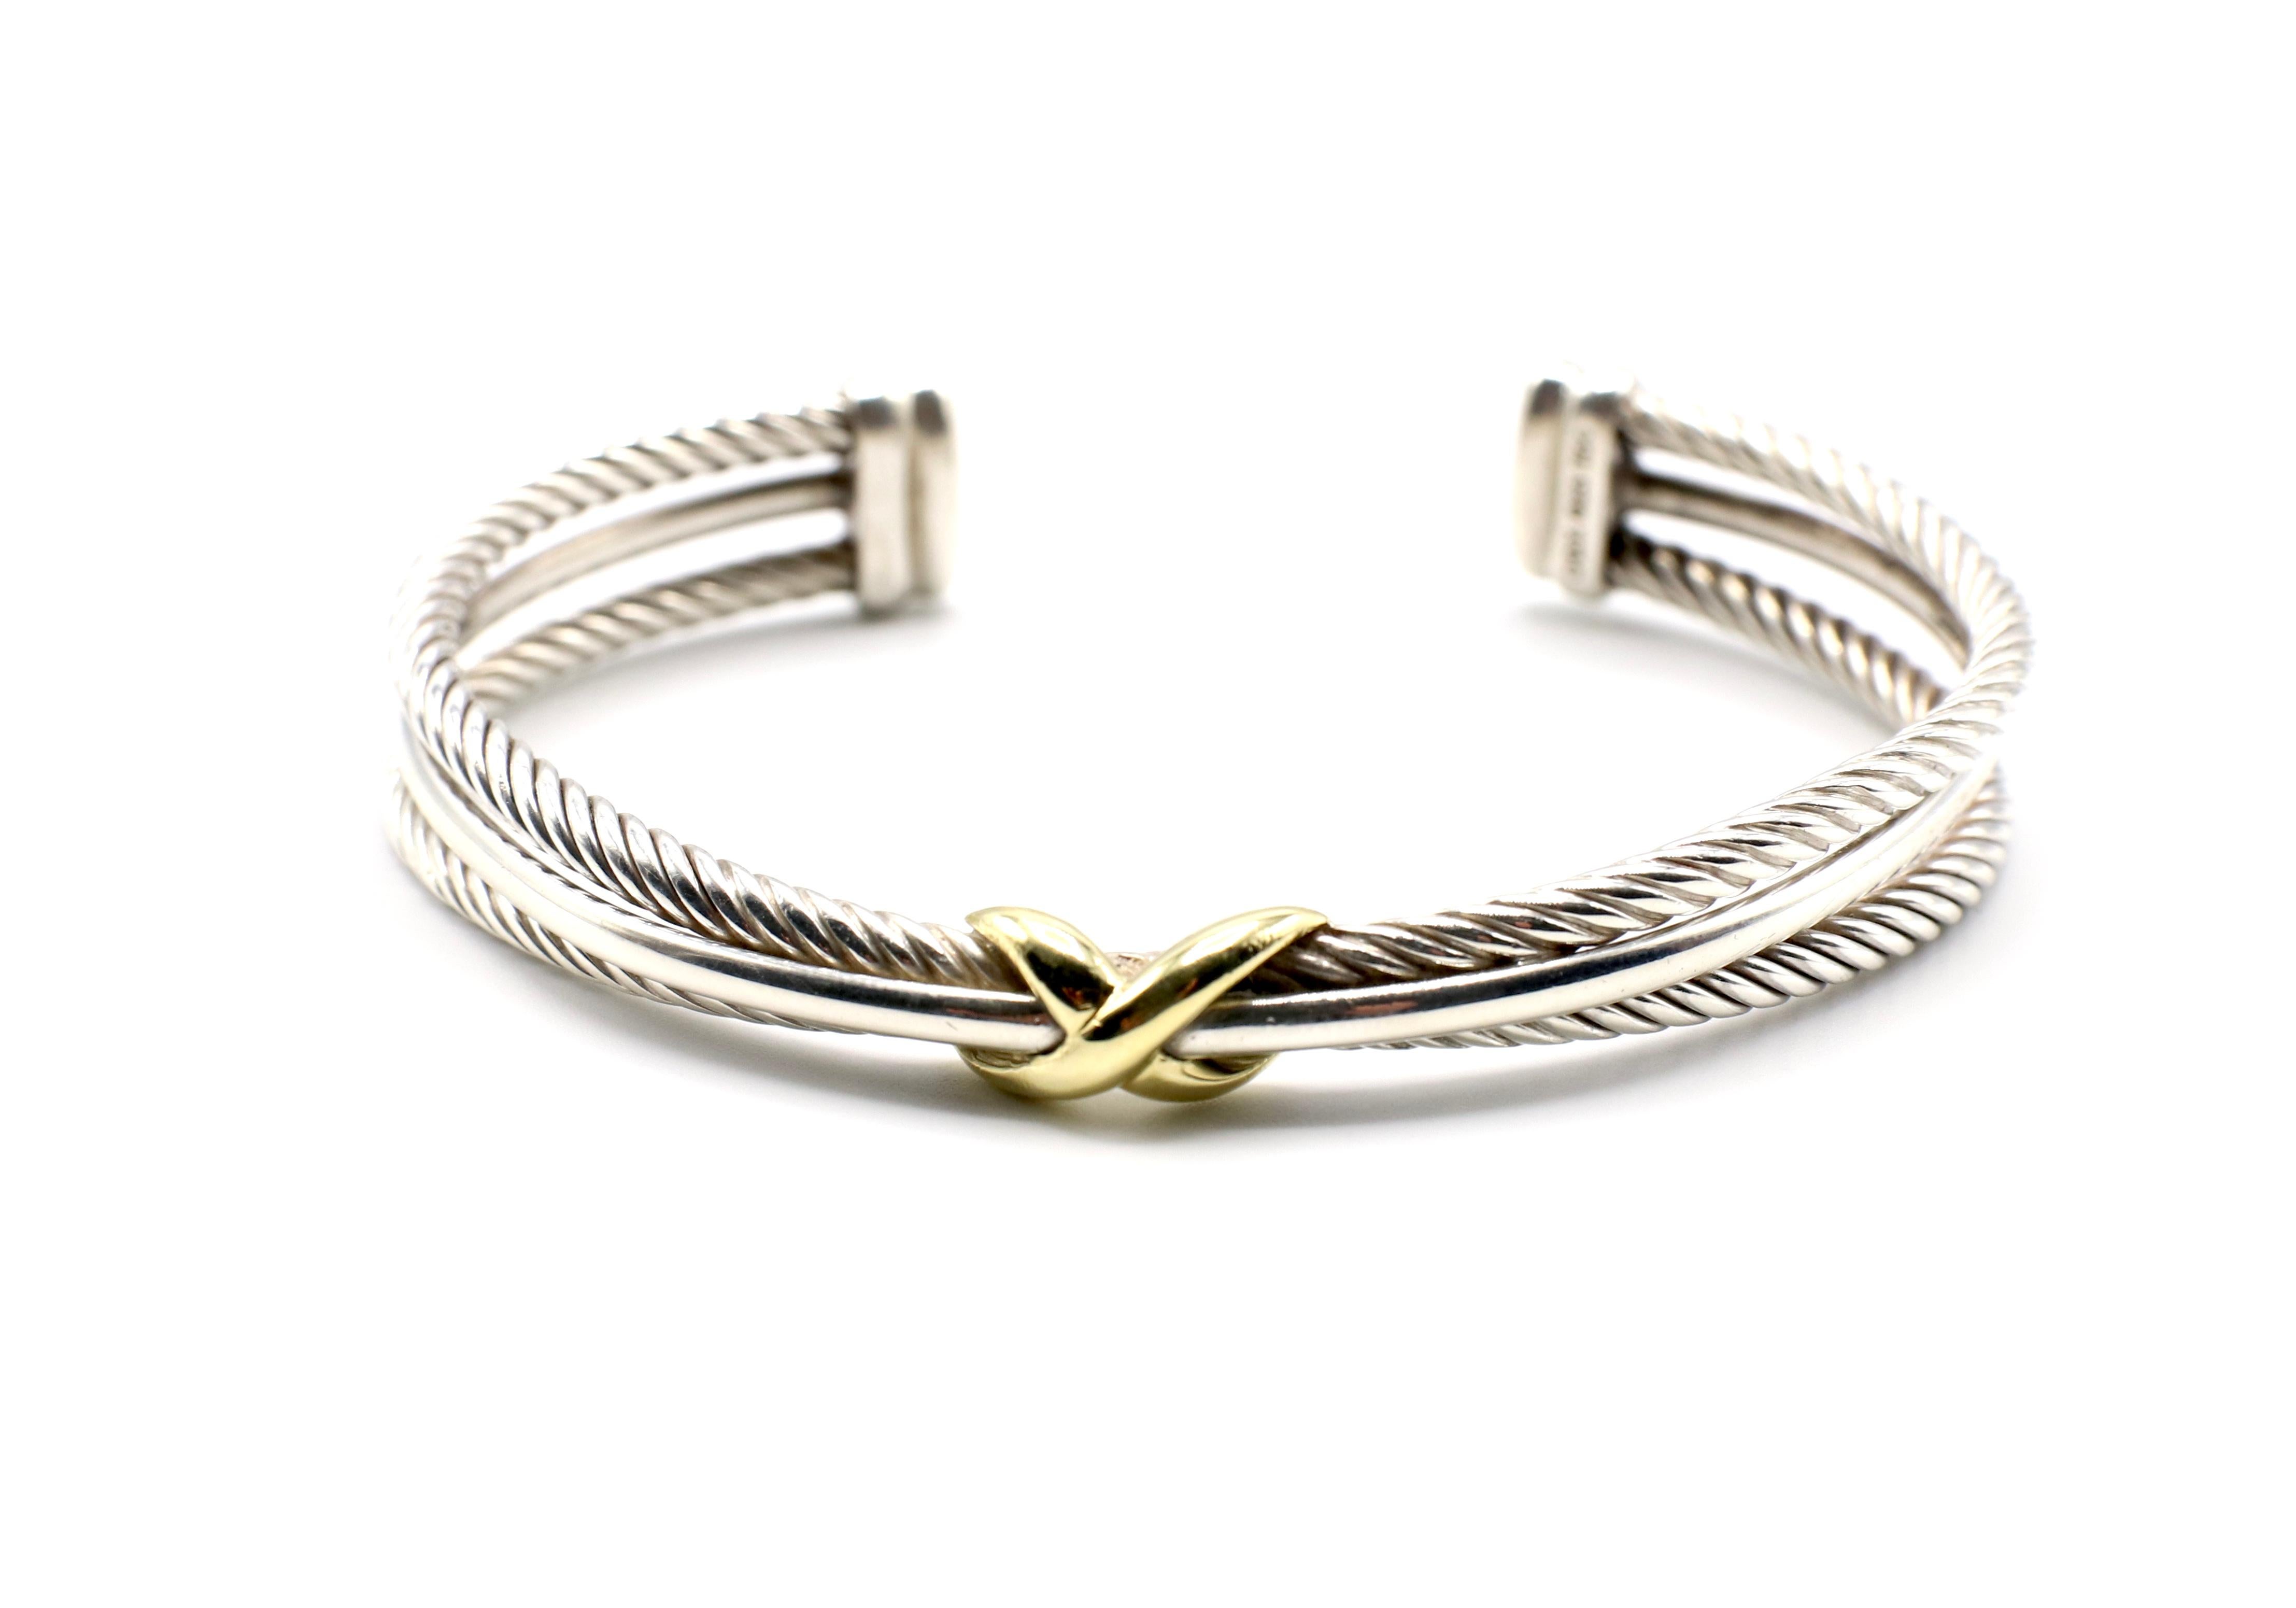 Vintage David Yurman Sterling Silver 18K Gold Cable Crossover X Bracelet Bangle

Metal: Sterling silver / 18k yellow gold
Signed: D.Y 925 750 
Bracelet measures 9.5mm wide at bottom and 5.2mm wide at top
Recently polished, excellent condition 